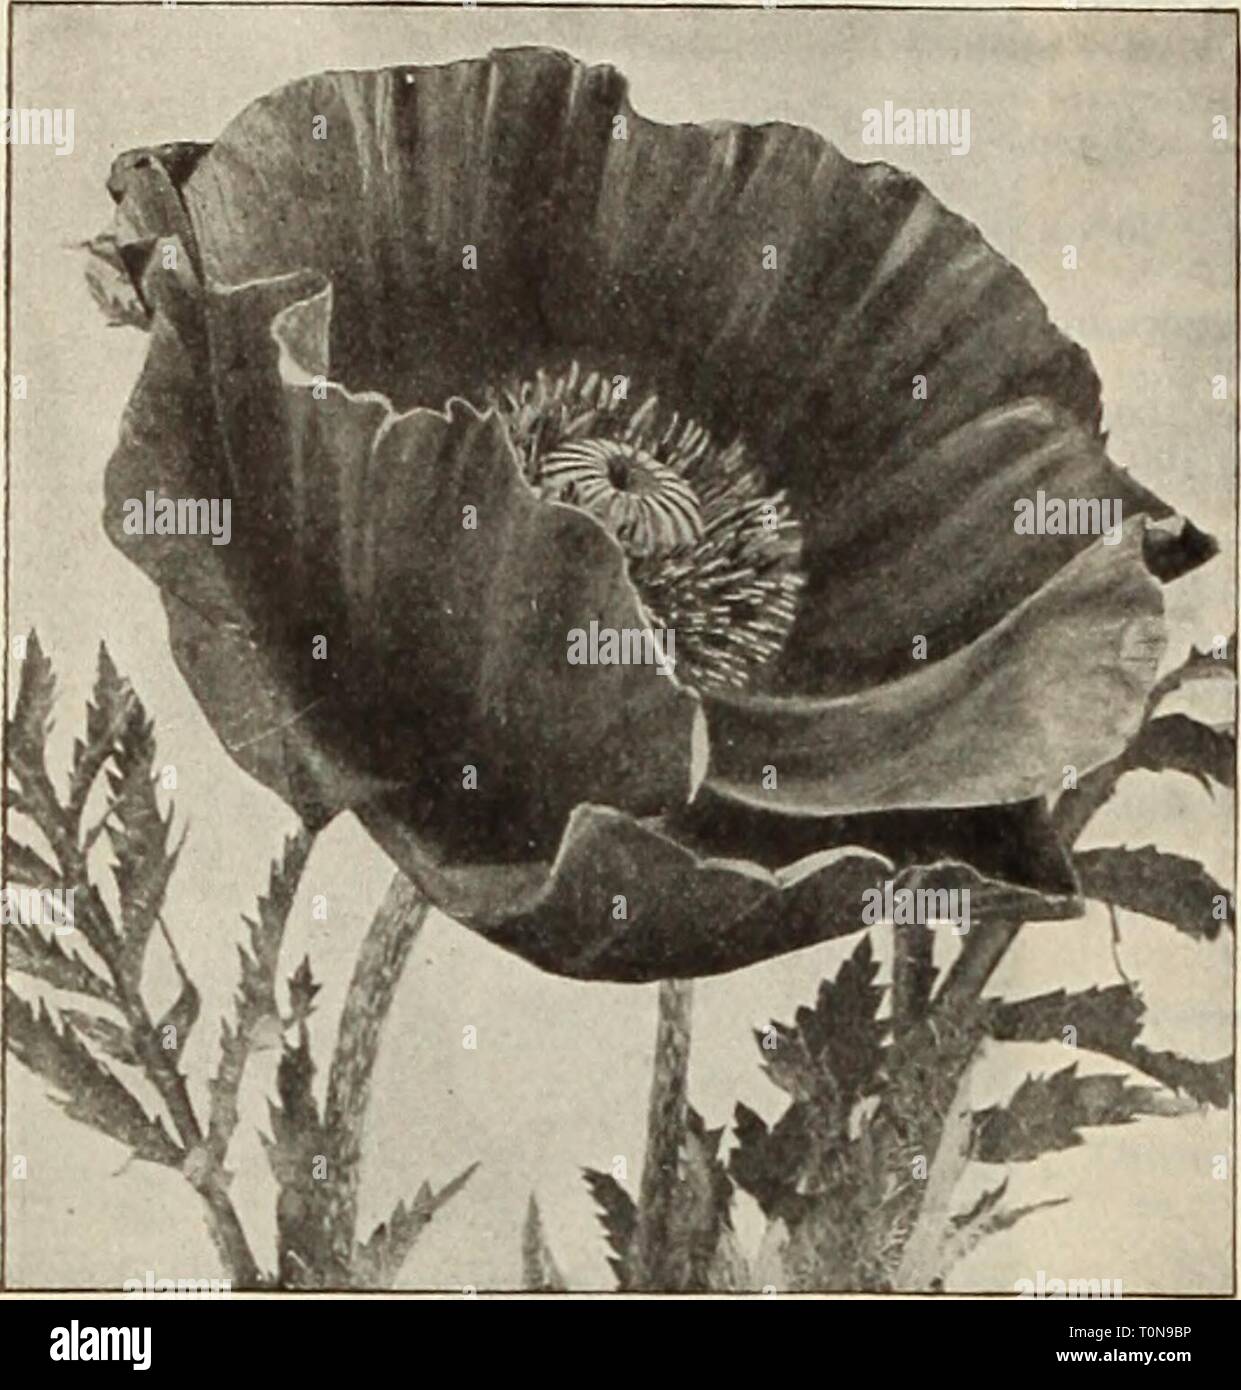 Dreer's autumn catalogue, 1913 (1913) Dreer's autumn catalogue, 1913  dreersautumncata1913henr Year: 1913  42    Oriental Poppy. MERTENSIA BiueBeiu. Virginlca. An early spring-flowering plant, growing about 1 to 1.'. fee-1 lii' ;h, with drooping panicles of handsome light blue flowers, fading to clear pink; one of the most interesting of our native spring flowers; May and June. 15 cts. each; $ 1. 50 per doz. OENOTHERA Evening Primrose). Missouriensis. Large golden yellow; 1 fcot. Pilgrimi. Large clusters of bright yellow. Speciosa. A rare, pure white variety. Young). Bright yellow; 1 foot. 15  Stock Photo